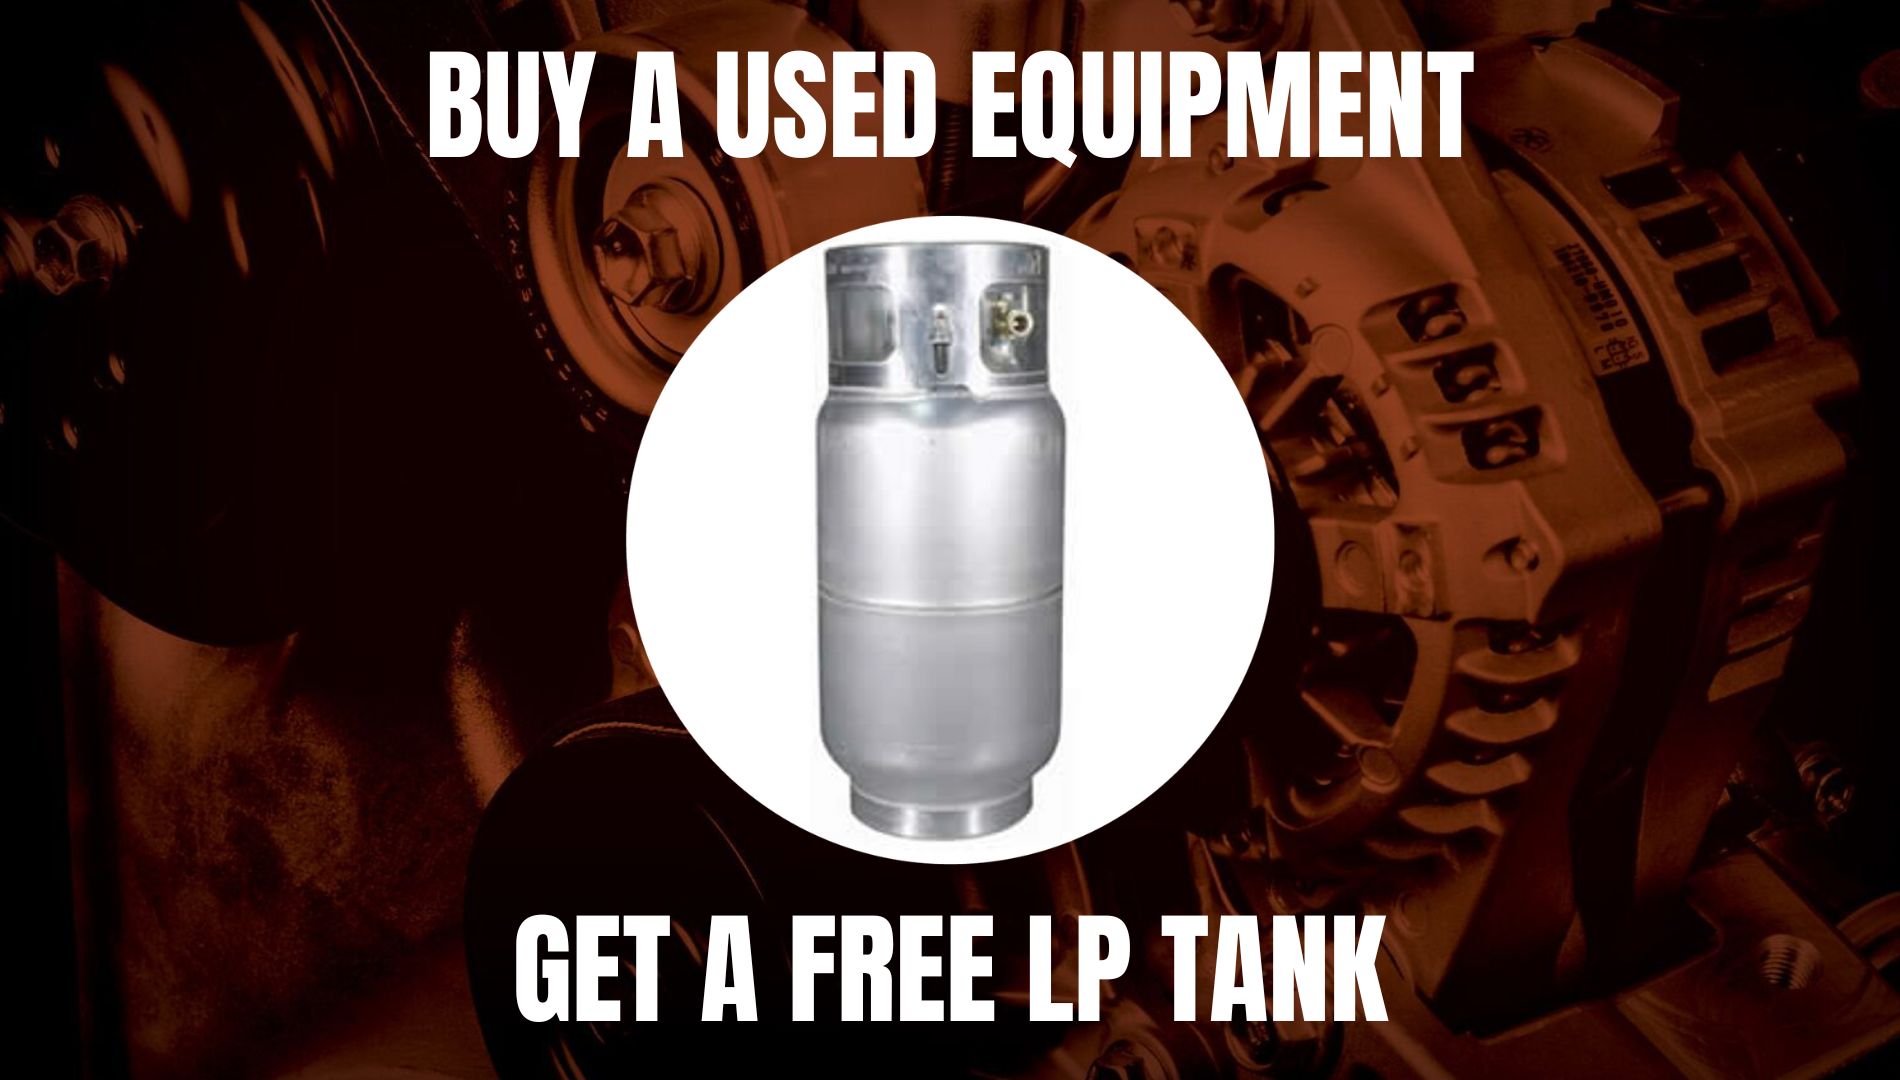 Blog post - Buy a Used Equipment get a FREE LP Tank